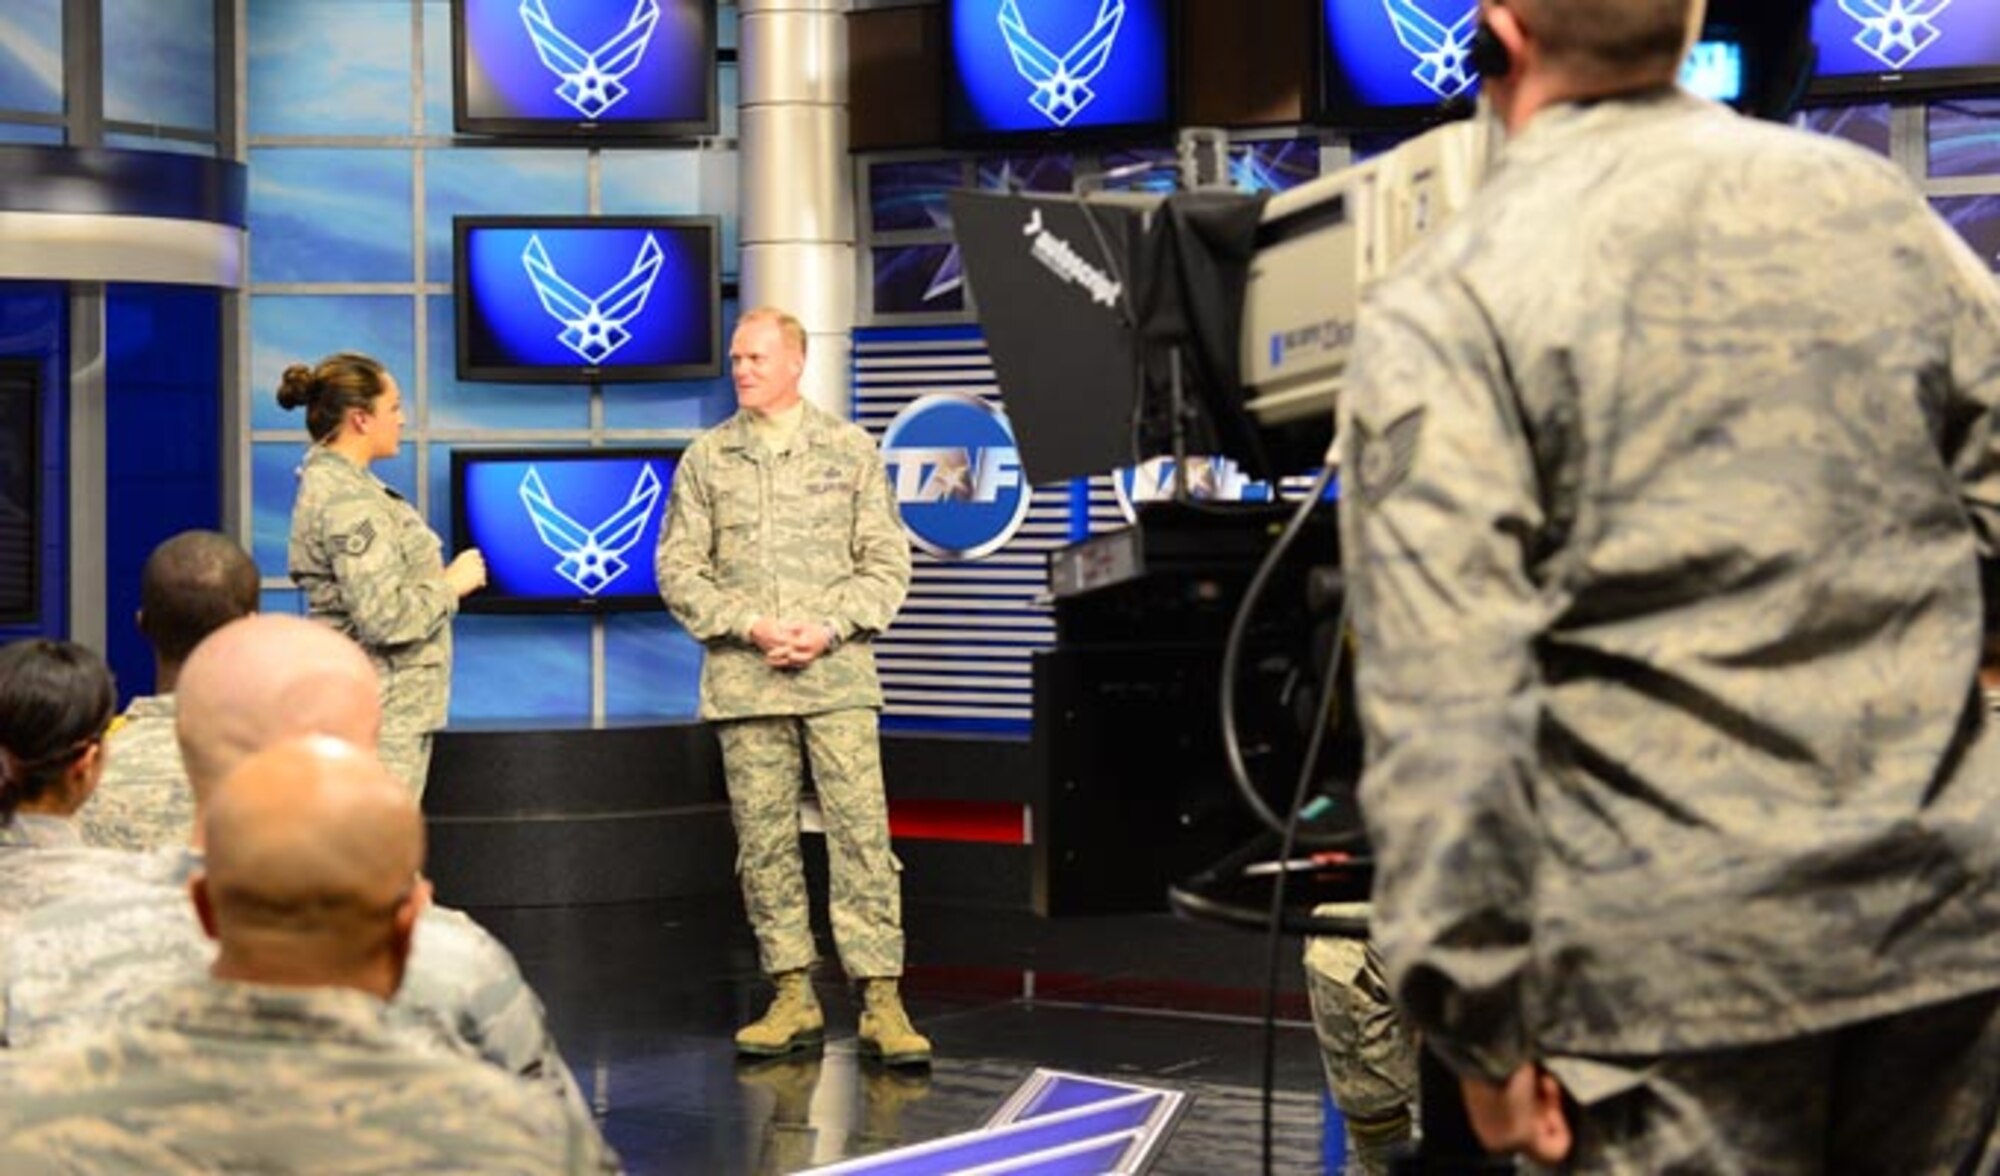 Chief Master Sgt. of the Air Force James Cody (center) is interviewed by Staff. Sgt. Shaun Hostutler (left) during a taping of "CHIEFChat" Nov. 12, 2013, at the Defense Media Activity at Fort George G. Meade, Md. Cody answered questions from live audience members as well as from Air Force social media channels and prerecorded video questions from Airmen. Cody discussed issues ranging from promotion testing to sexual assault prevention.